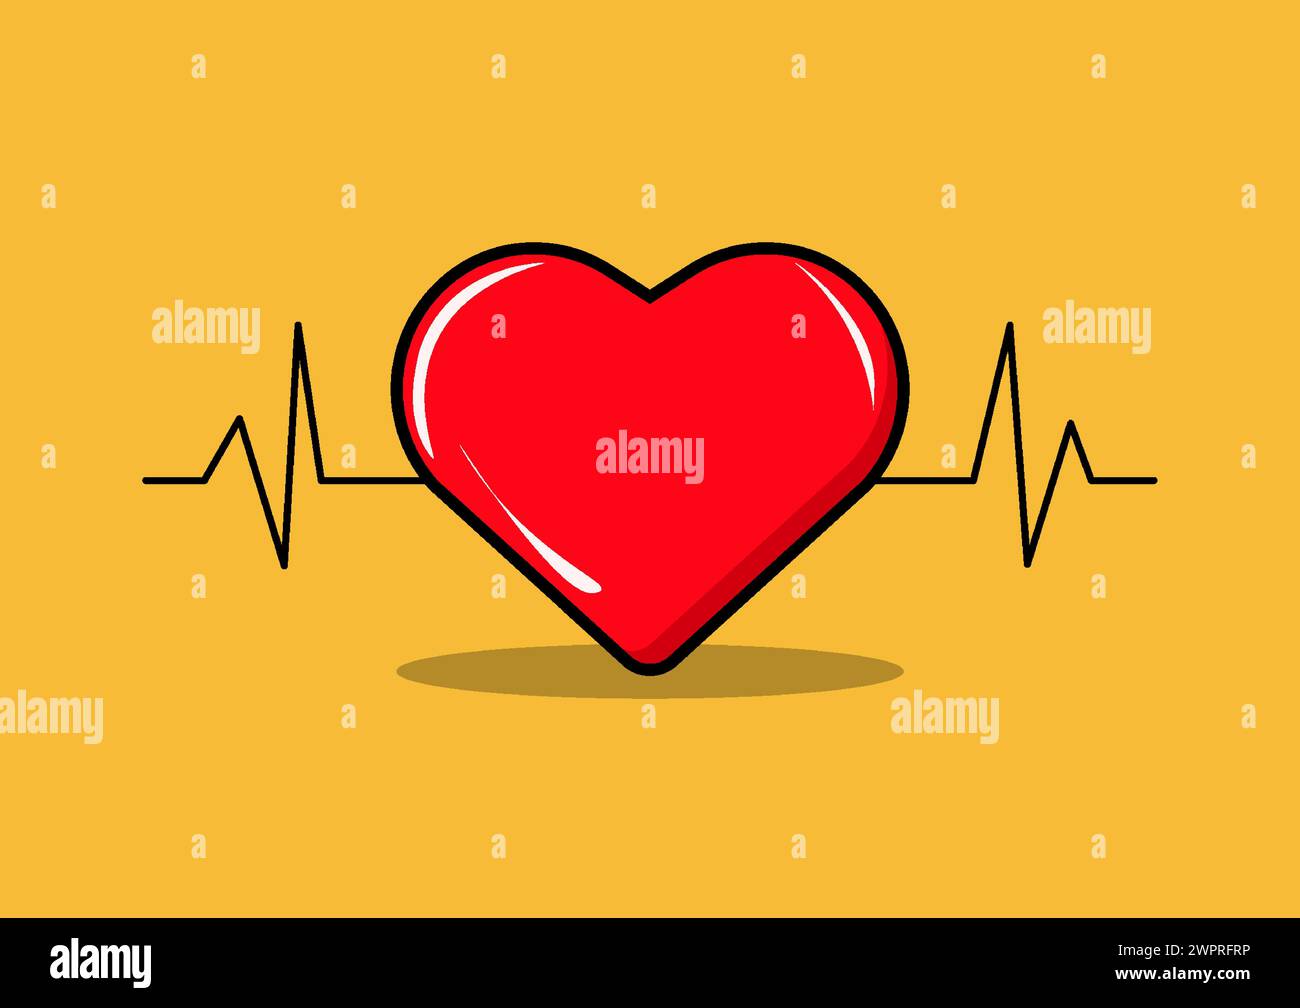 Cartoon vector illustration of a red heart with a heart rate graph in the background. combines the symbol of love with the concept of heart rhythm, cr Stock Vector